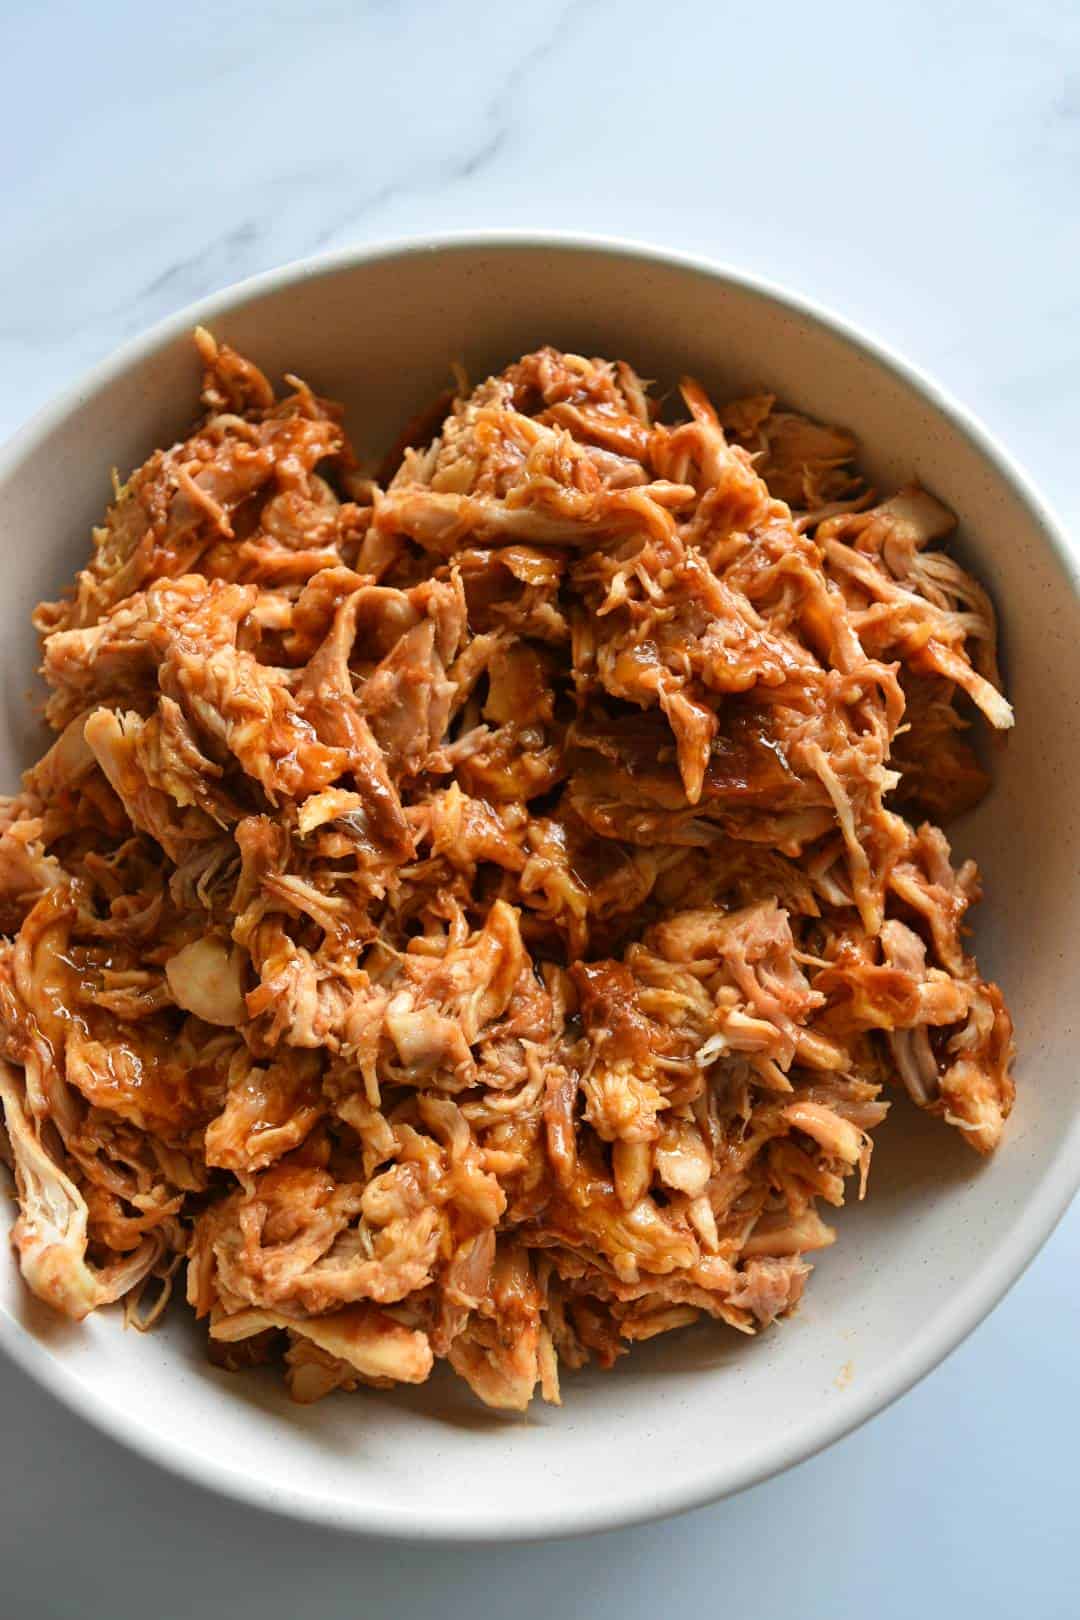 Pulled BBQ chicken in a bowl.